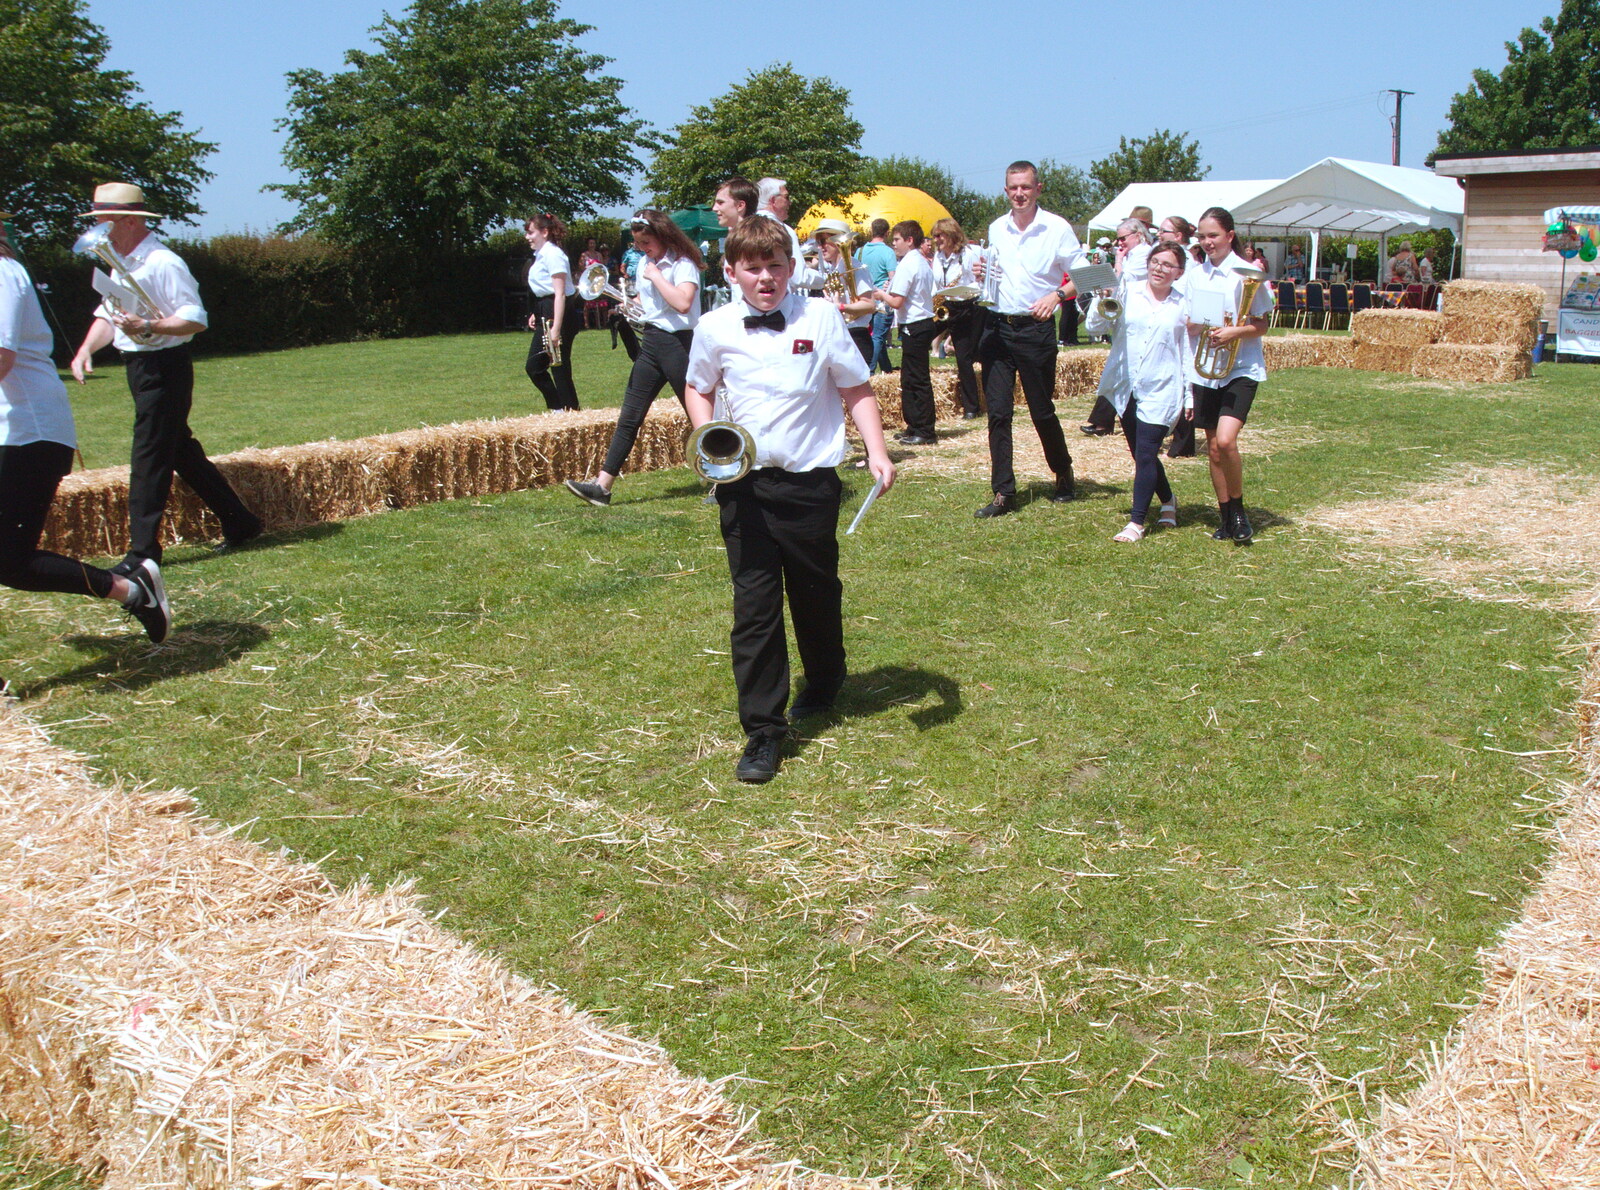 The band disperses on reaching the playing field from GSB and the Gislingham Fete, Suffolk - 29th June 2019